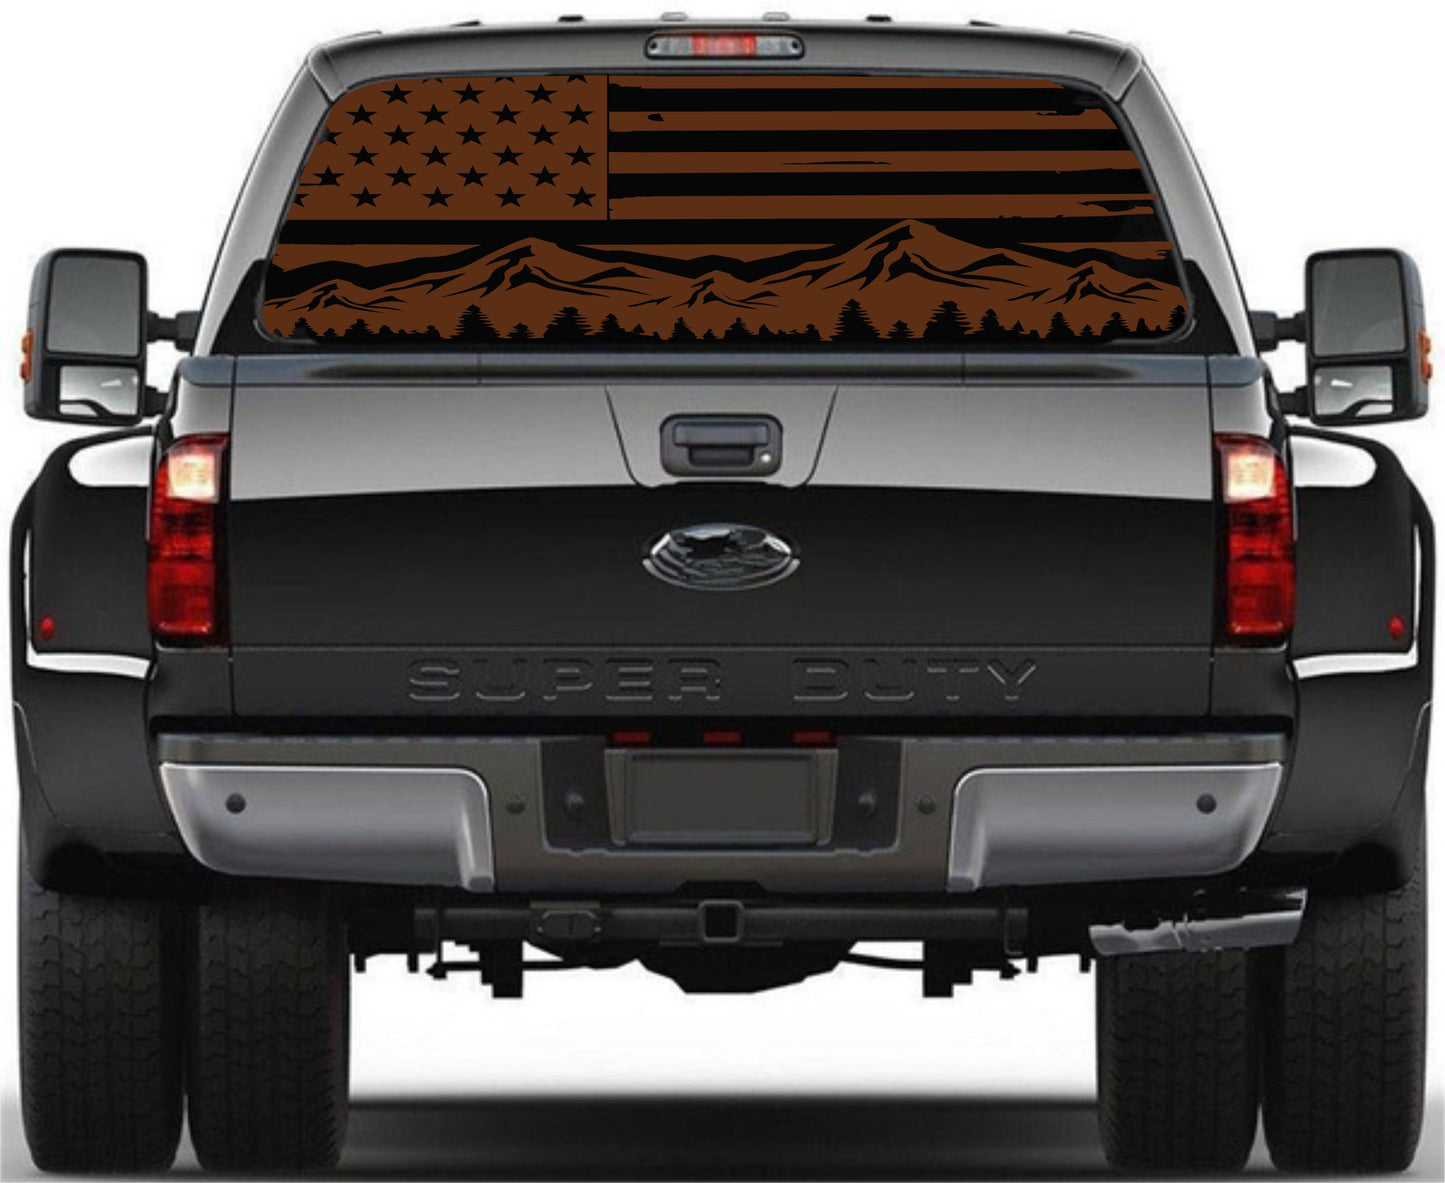 american flag mountain silhouette decals car stickers for trucks Rear window. Ford Trucl Ram Truck Chevy truck, Toyota truck, GMC truck